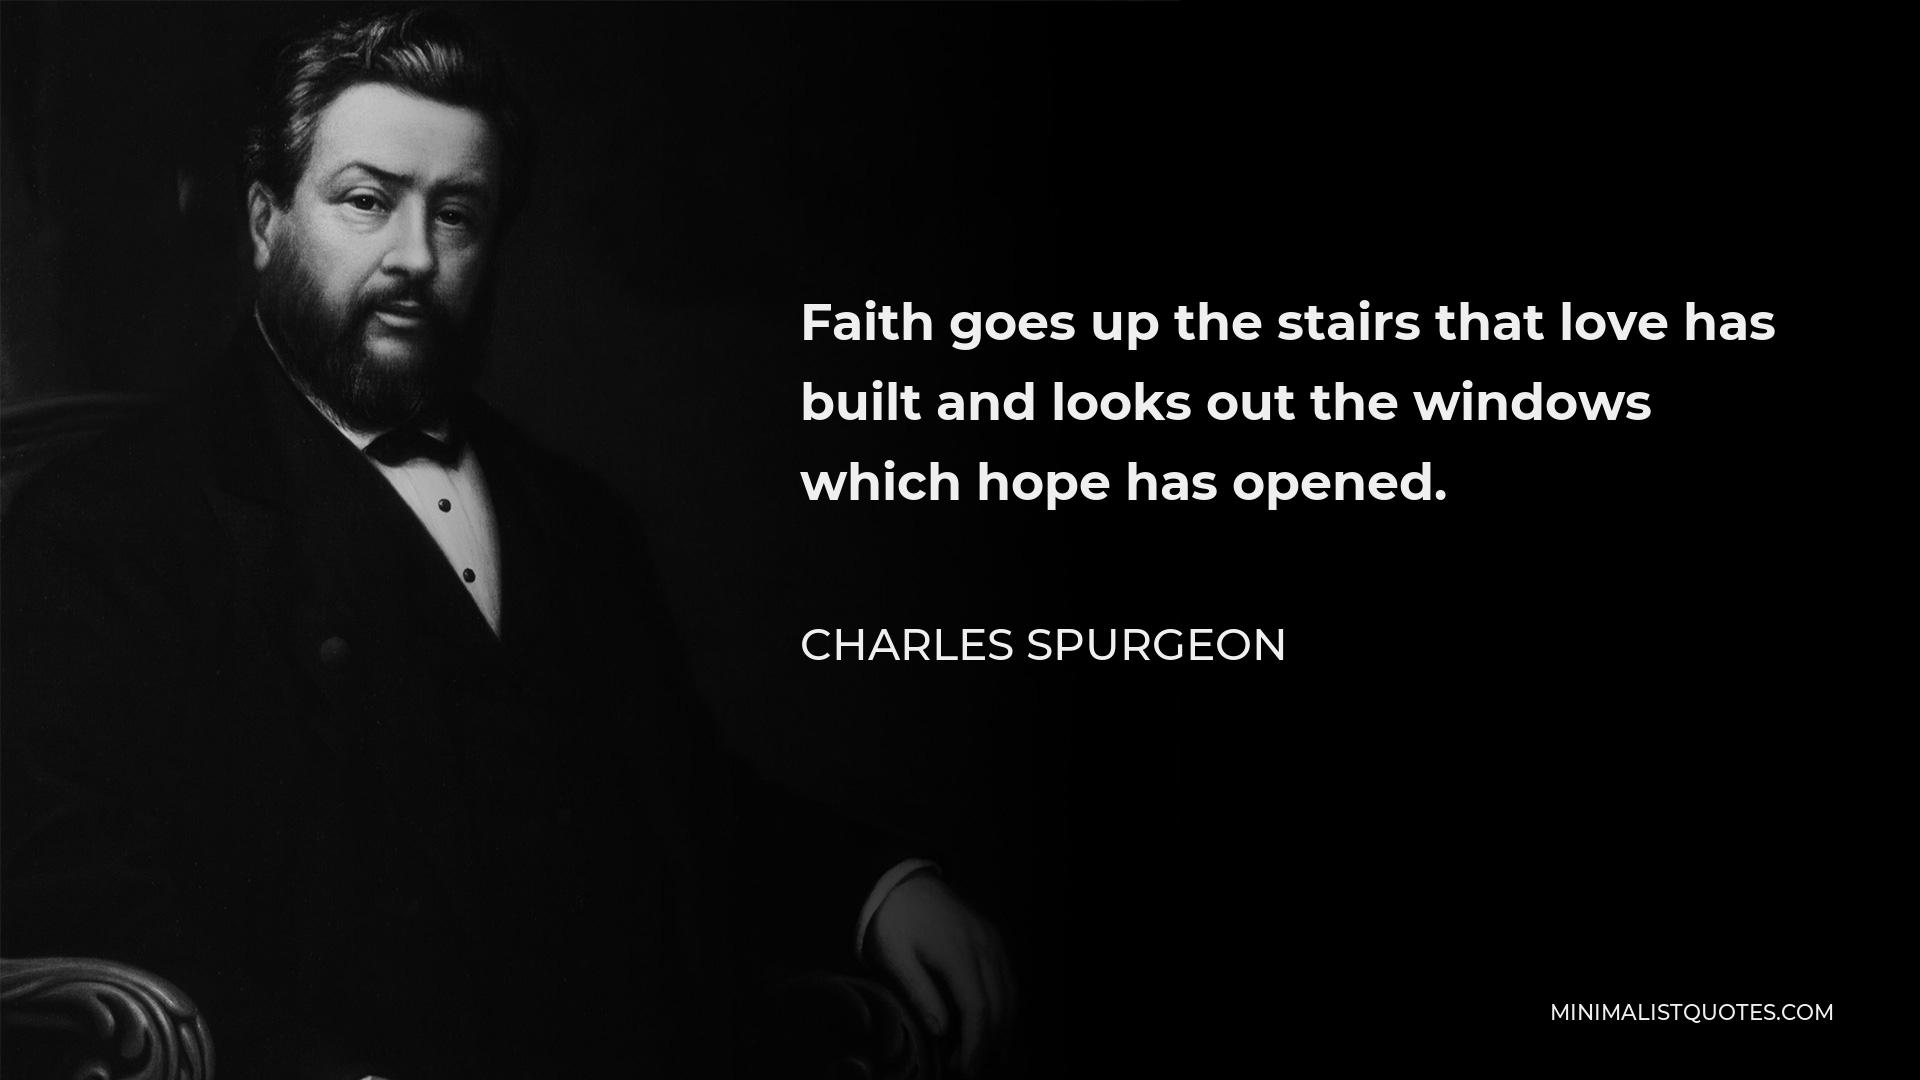 Charles Spurgeon Quote - Faith goes up the stairs that love has built and looks out the windows which hope has opened.